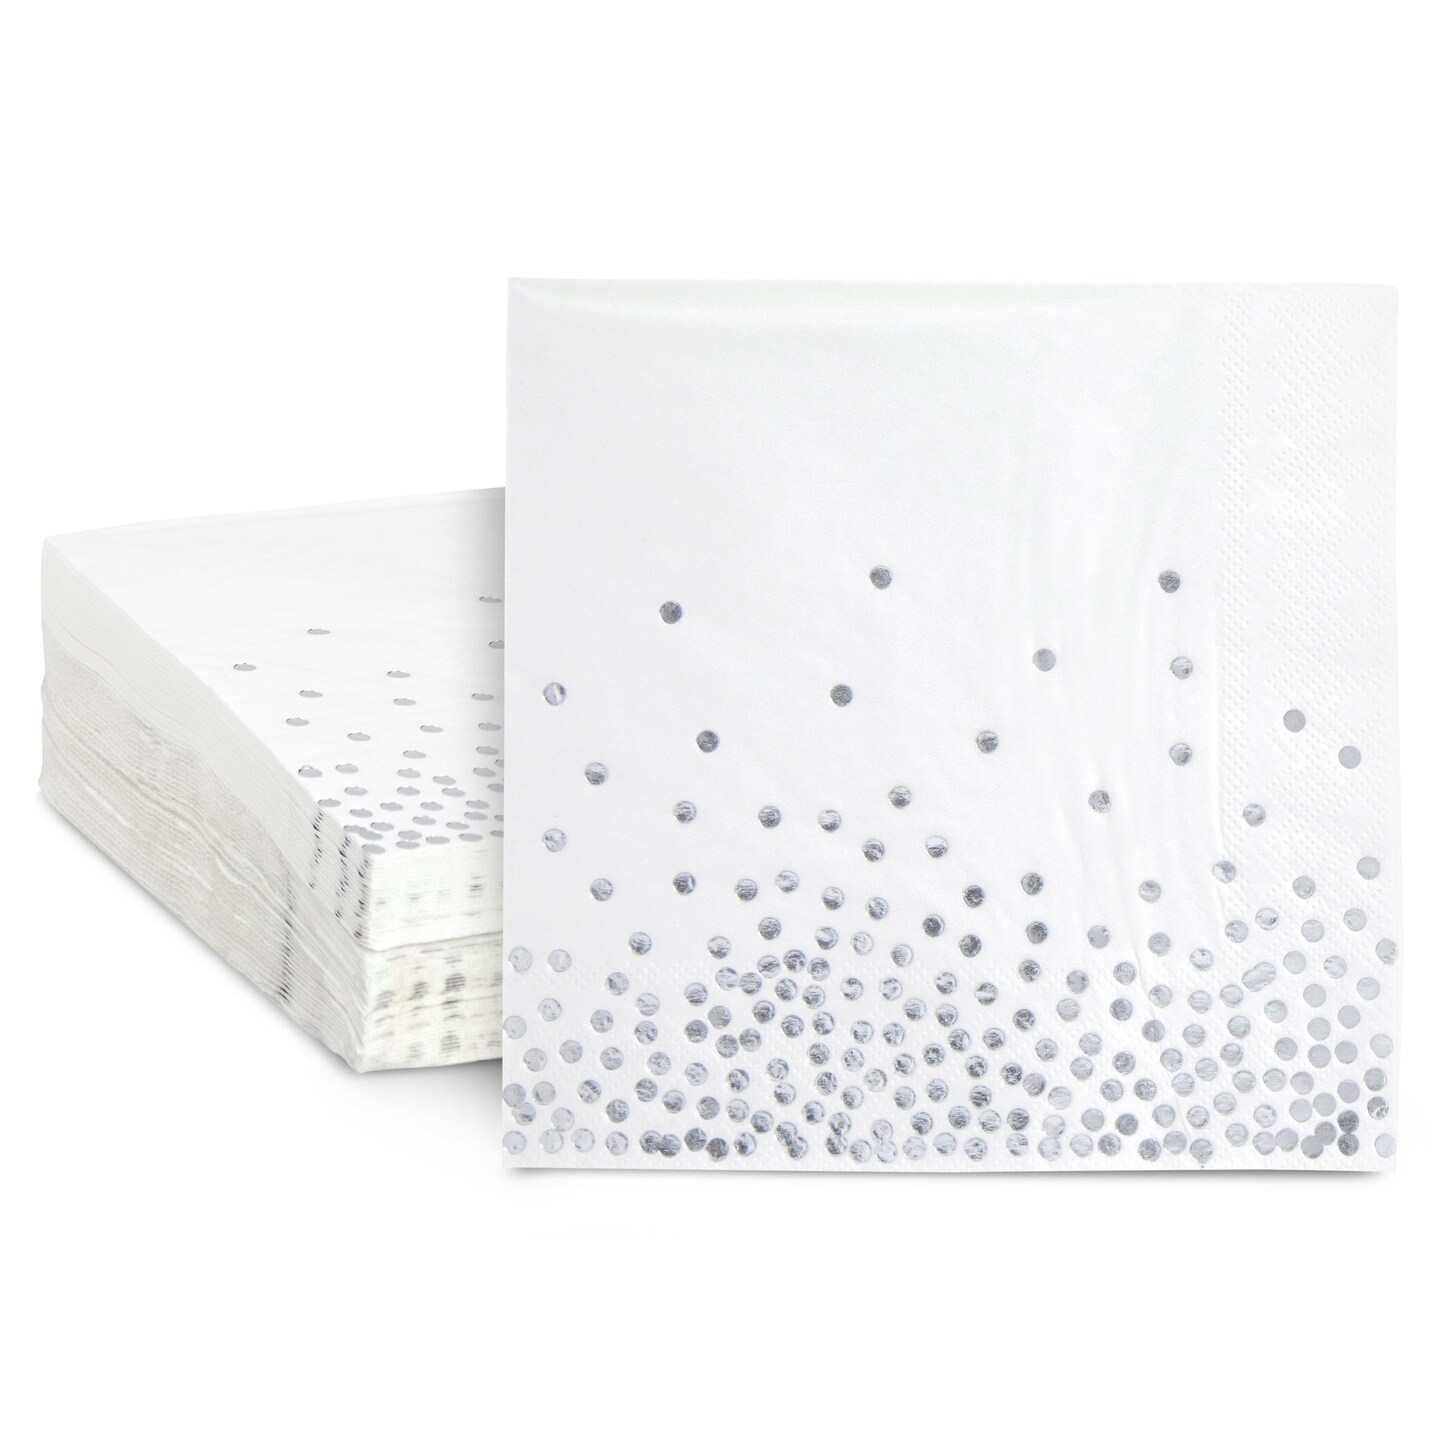 50 Pack White and Silver Paper Napkins for Wedding Reception, Foil Polka Dots for Birthday Party Decorations and Holiday Parties (3-Ply, 6.5 x 6.5 In)